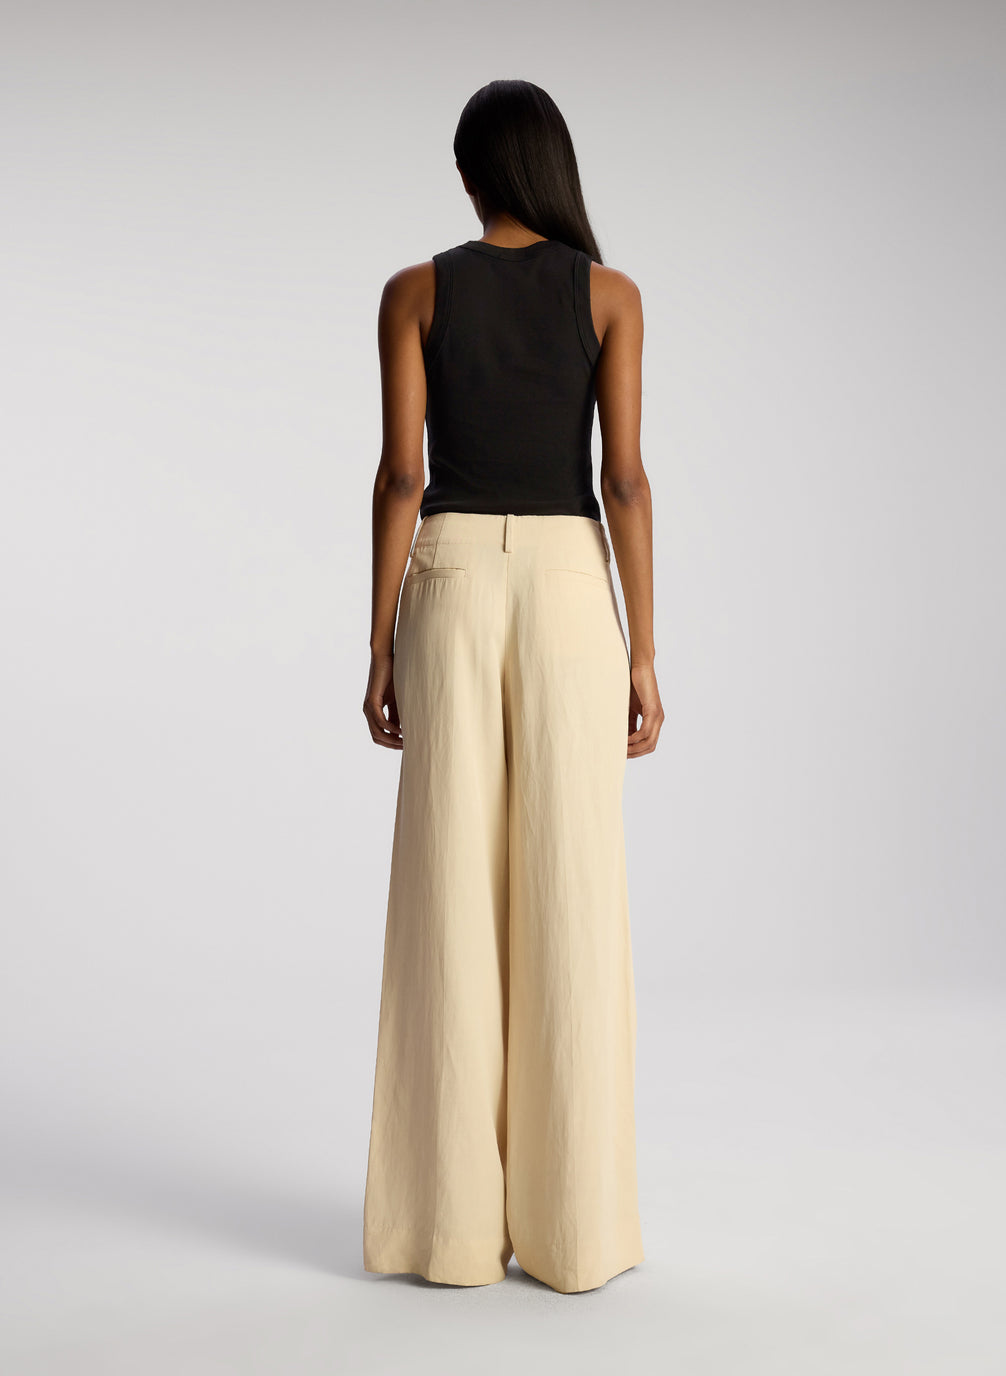 back view of woman wearing black tank top and beige pants